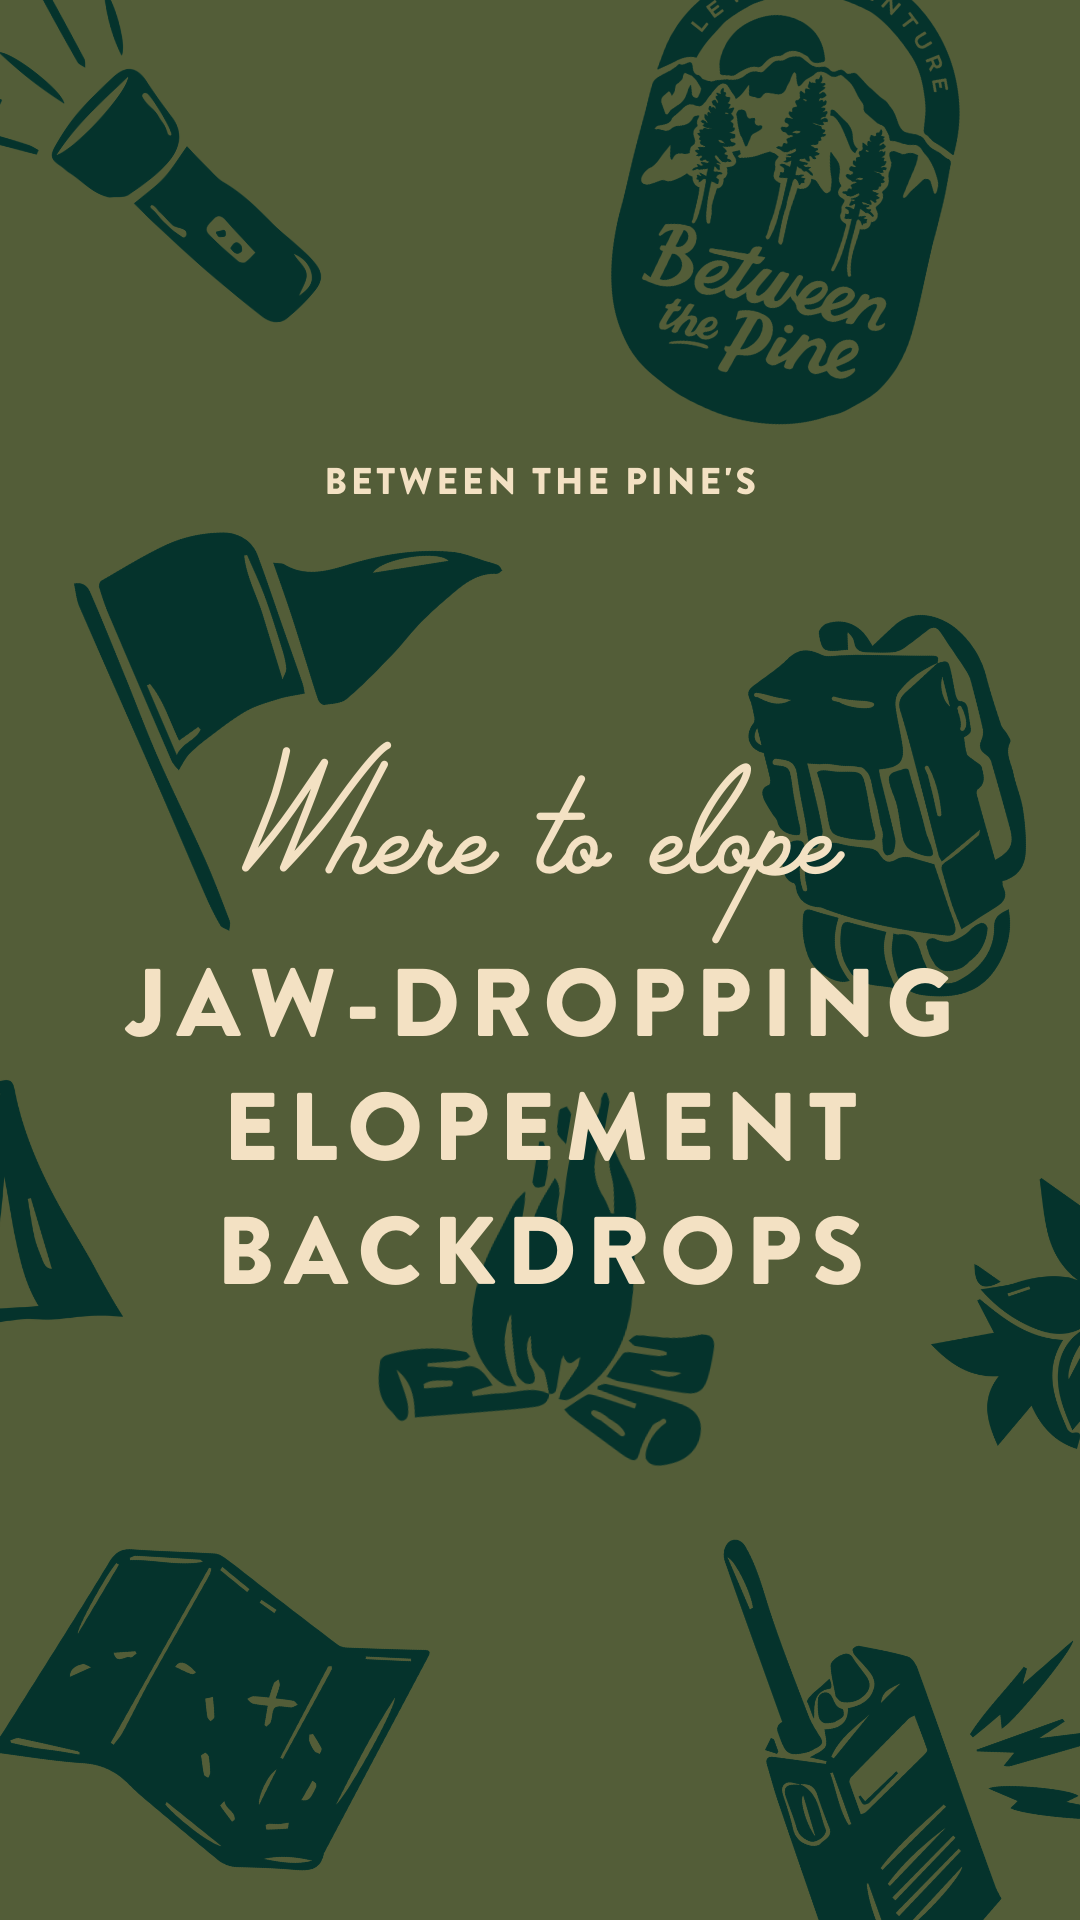 Jaw dropping Elopement backgrounds Guide Cover.png